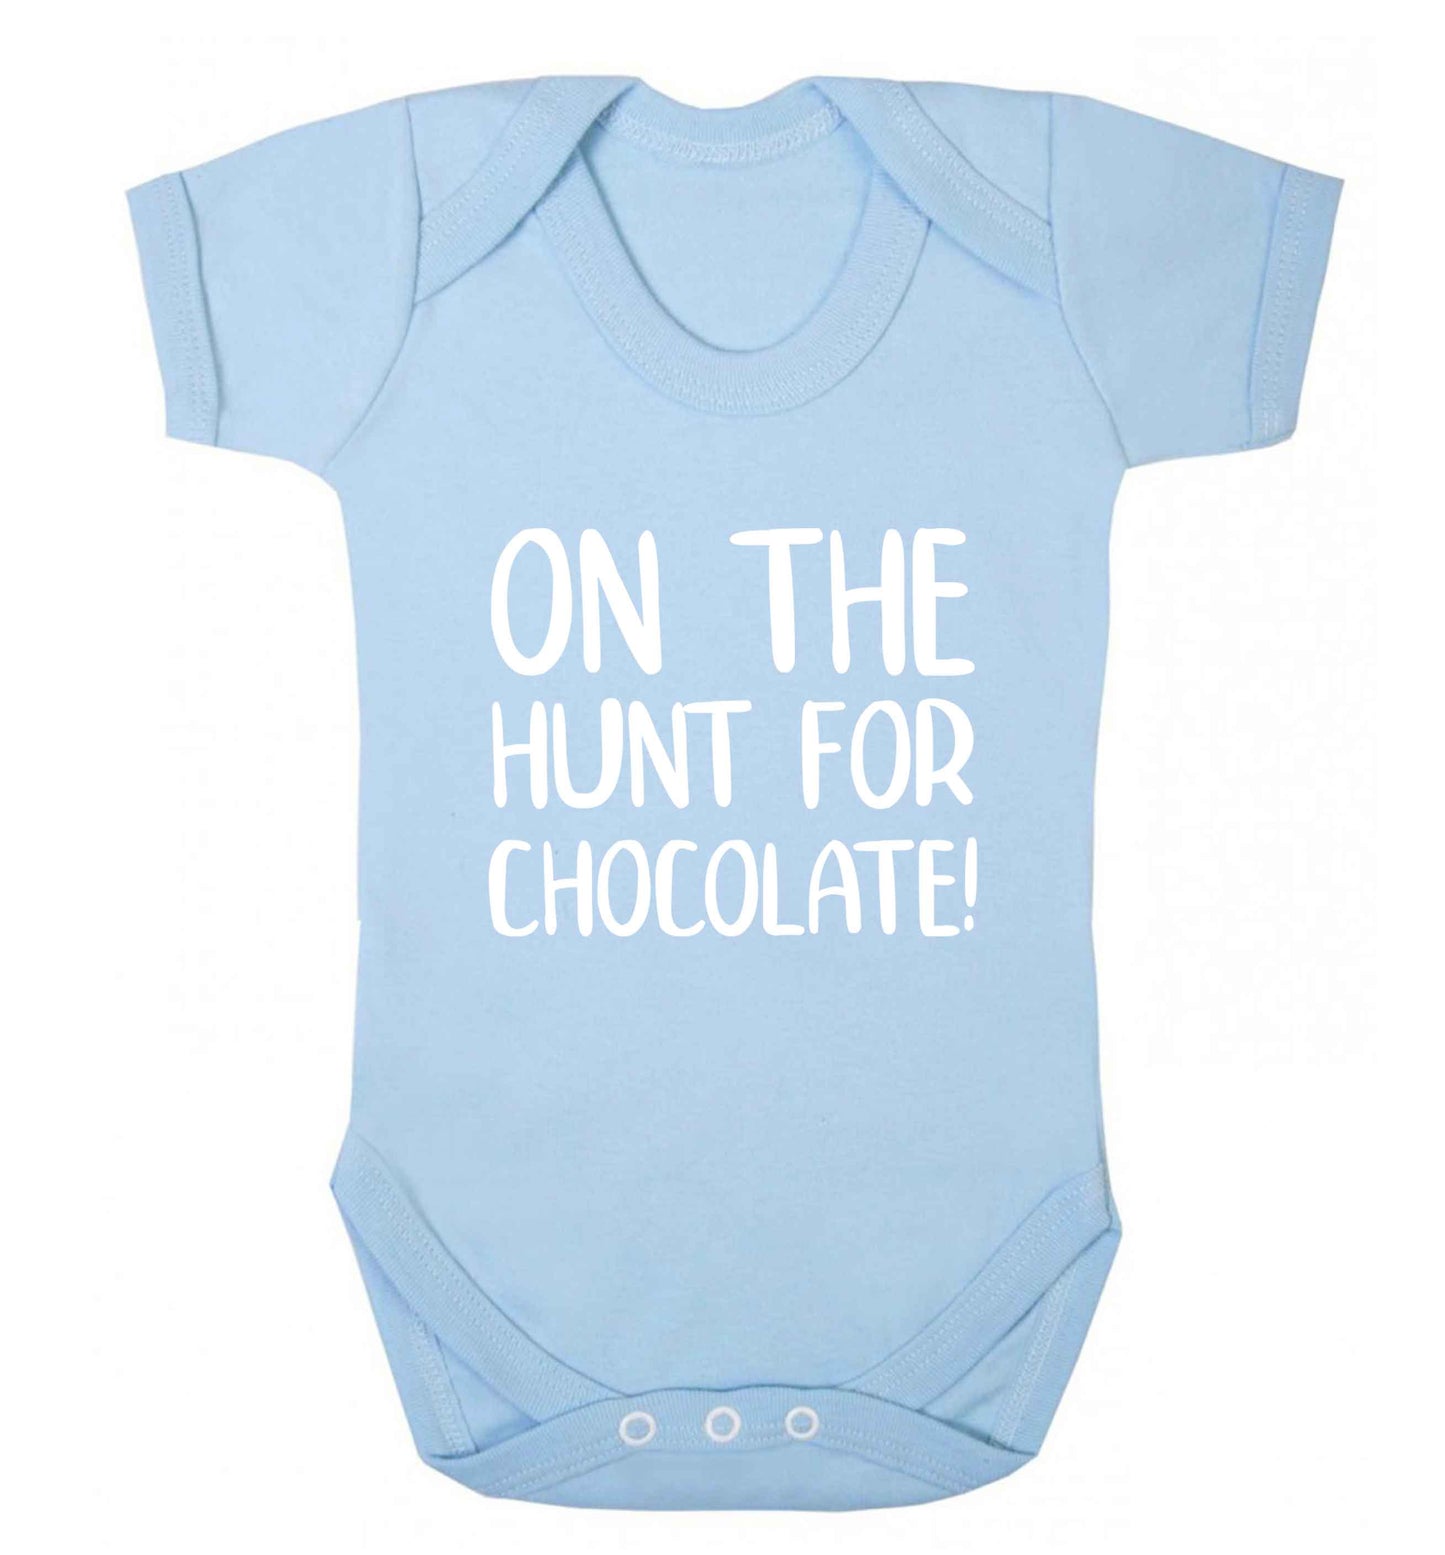 On the hunt for chocolate! baby vest pale blue 18-24 months